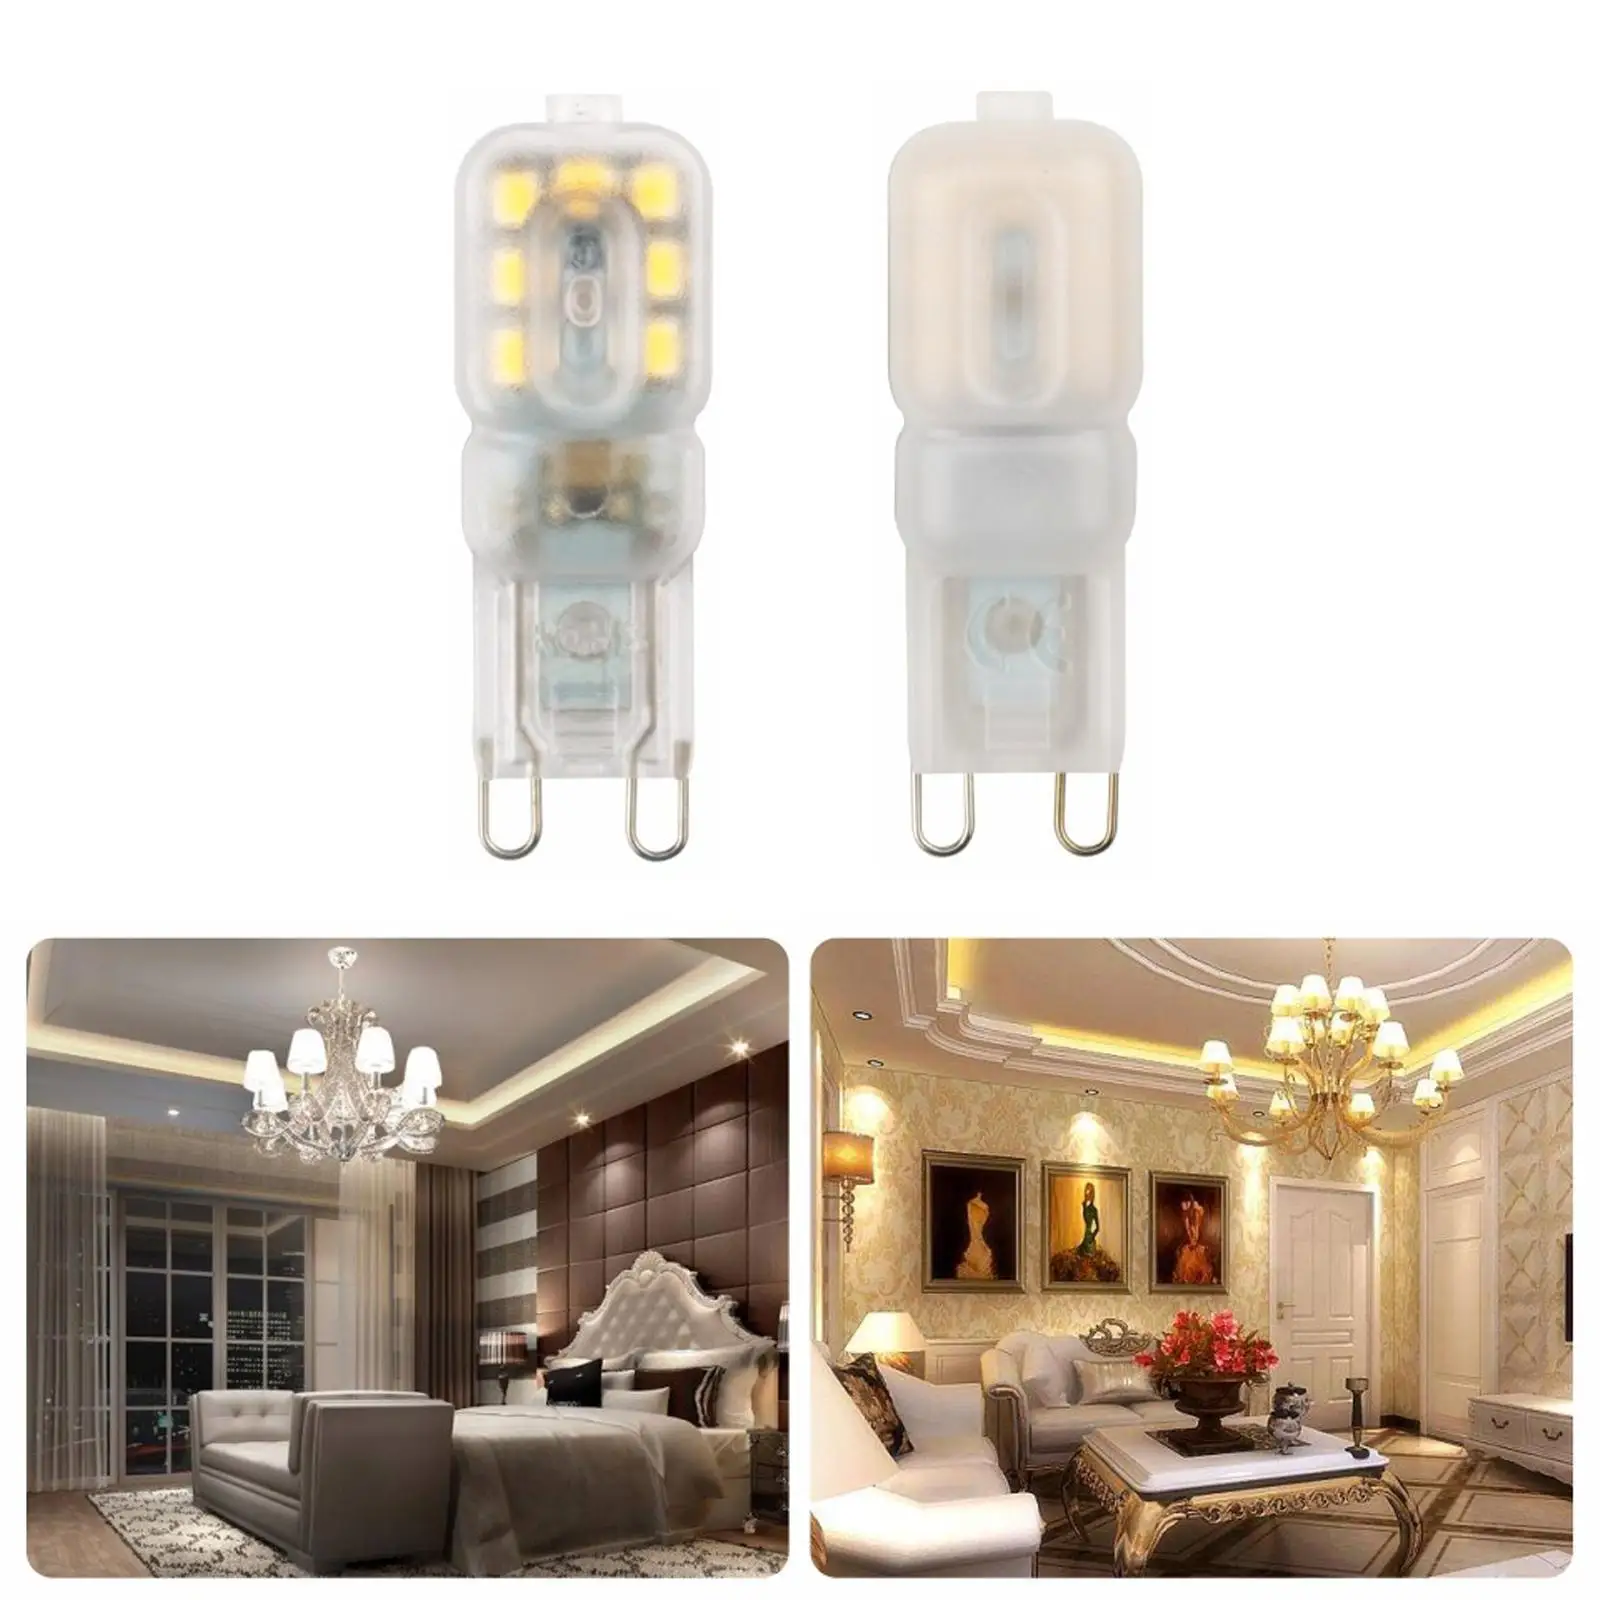 

G9 LED Light Dimmable Bulb 3W 5W SMD 2835 Spotlight For Crystal Chandelier Replace 20W 30W Halogen Lamp Lighting AC 220V